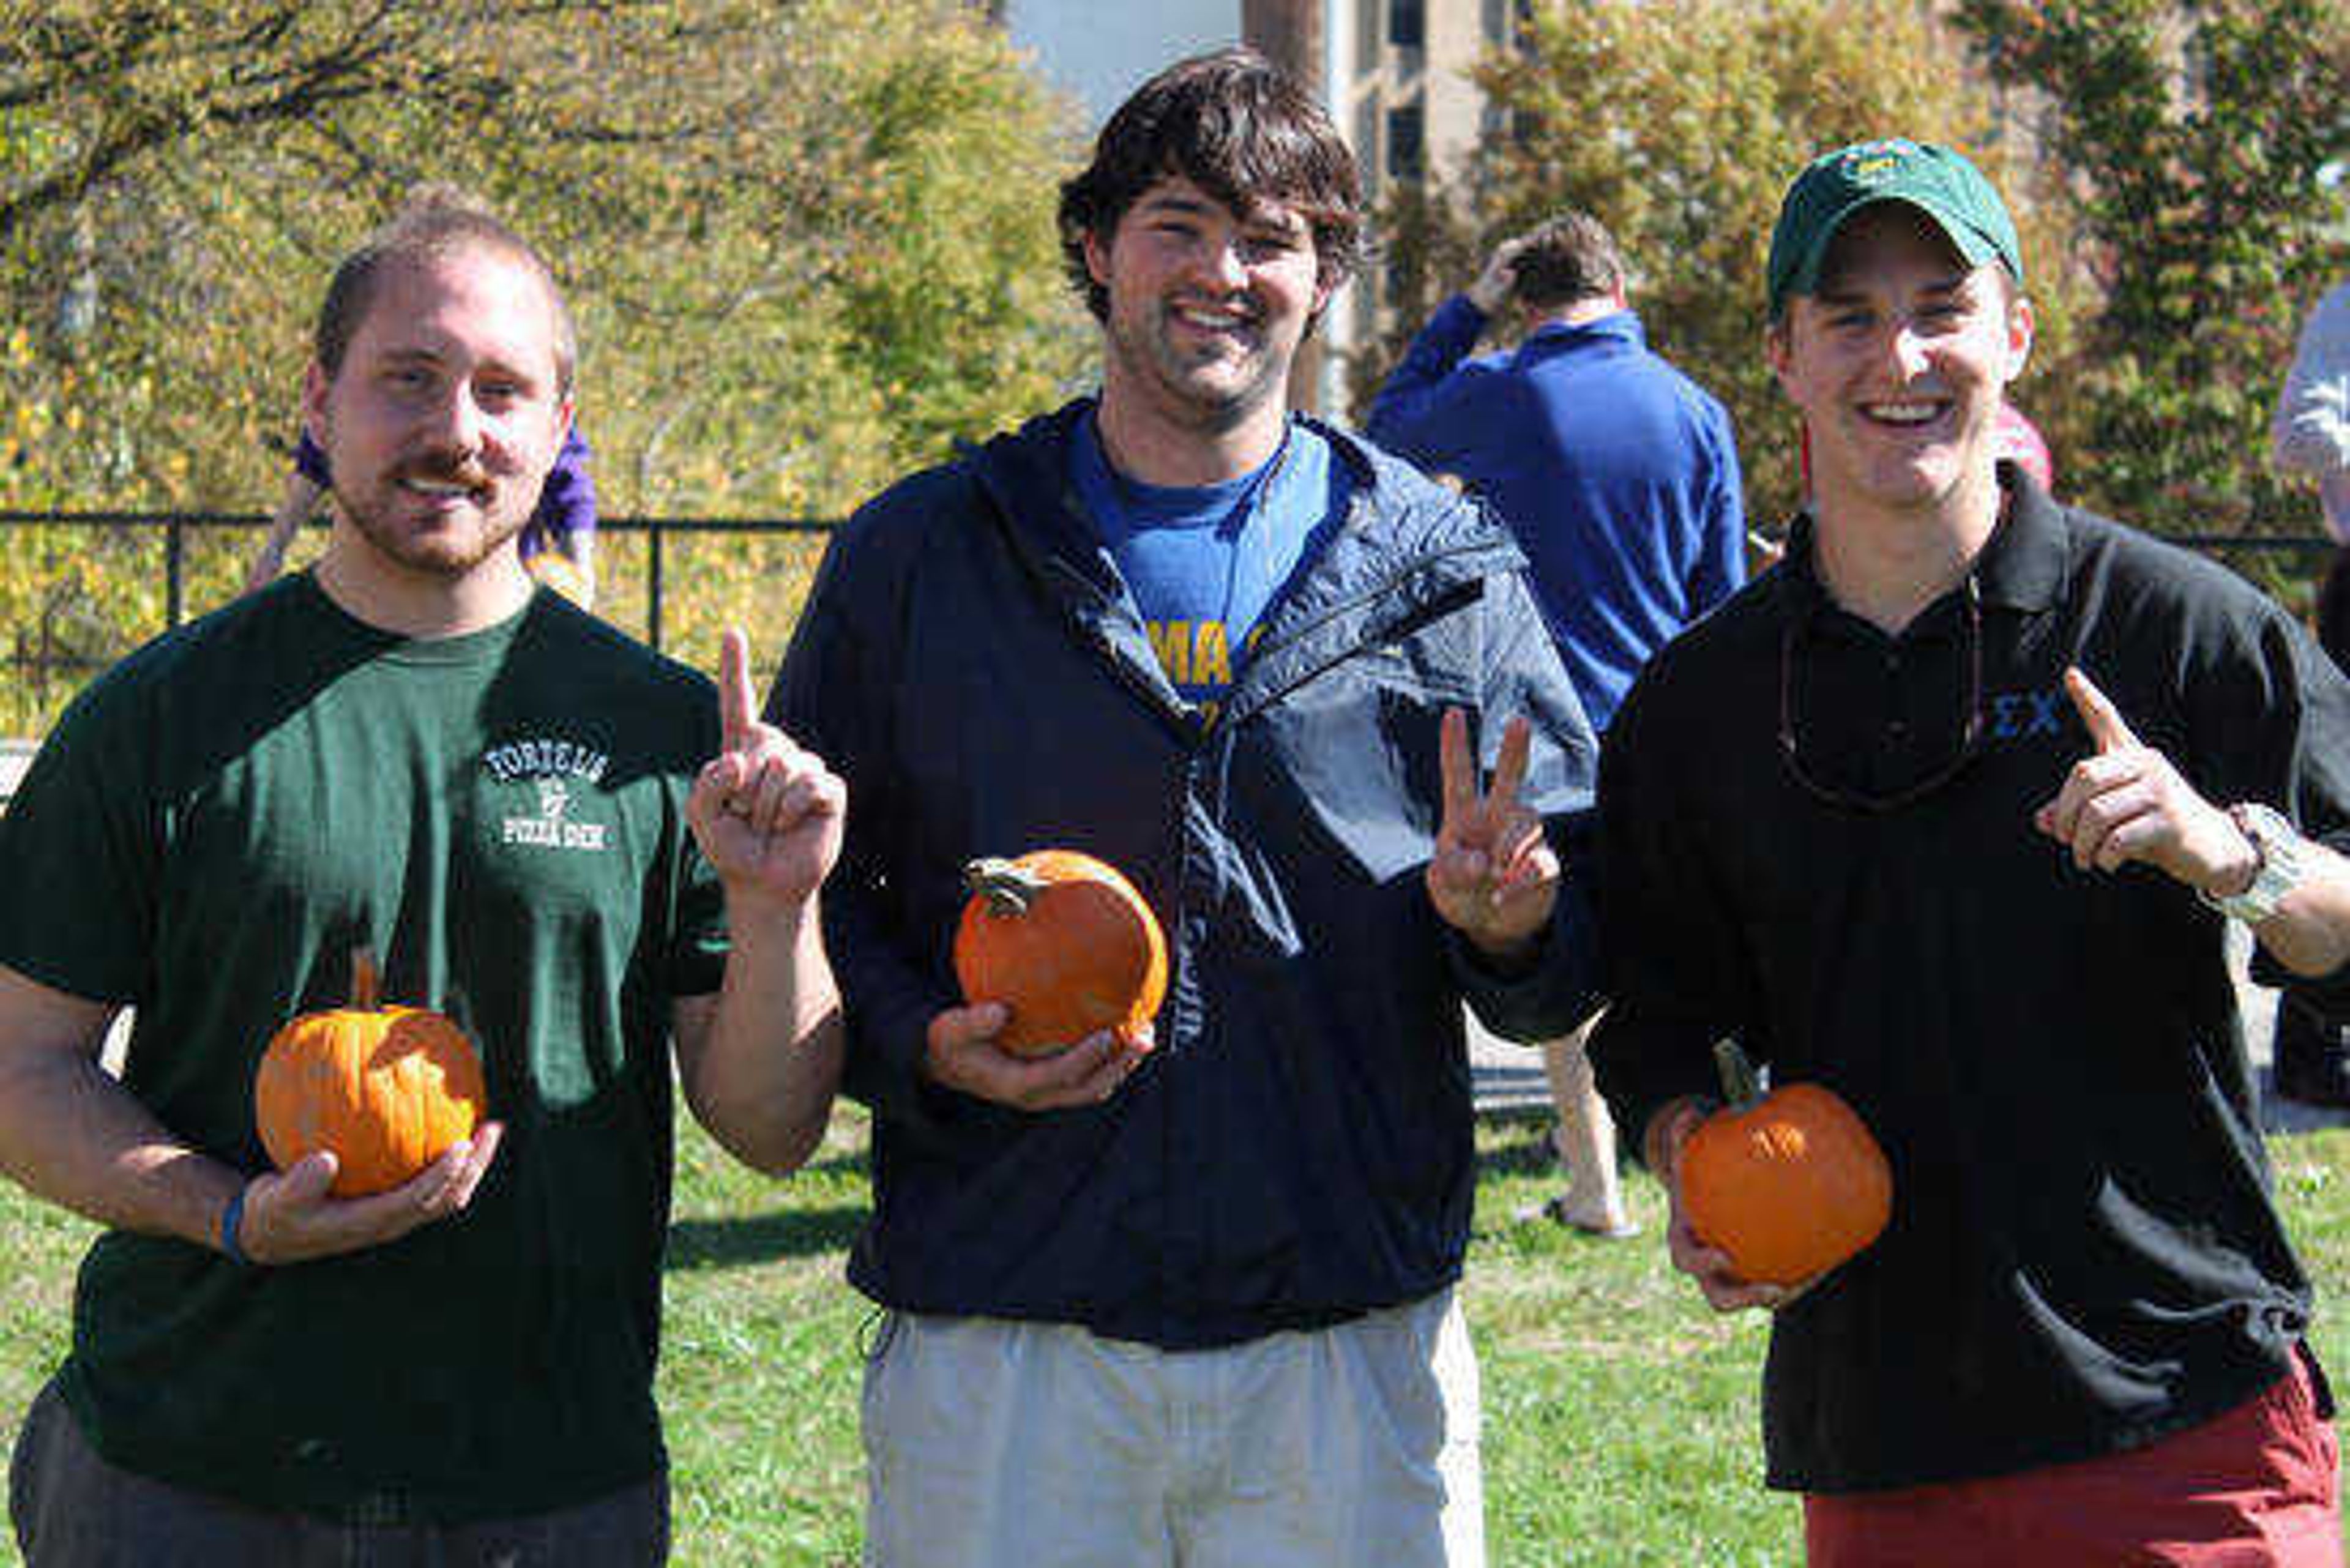 Nik Weber, Will Jelks, and Chad Mandernach led the contest with the farthest throws. Photo by Sean Burke